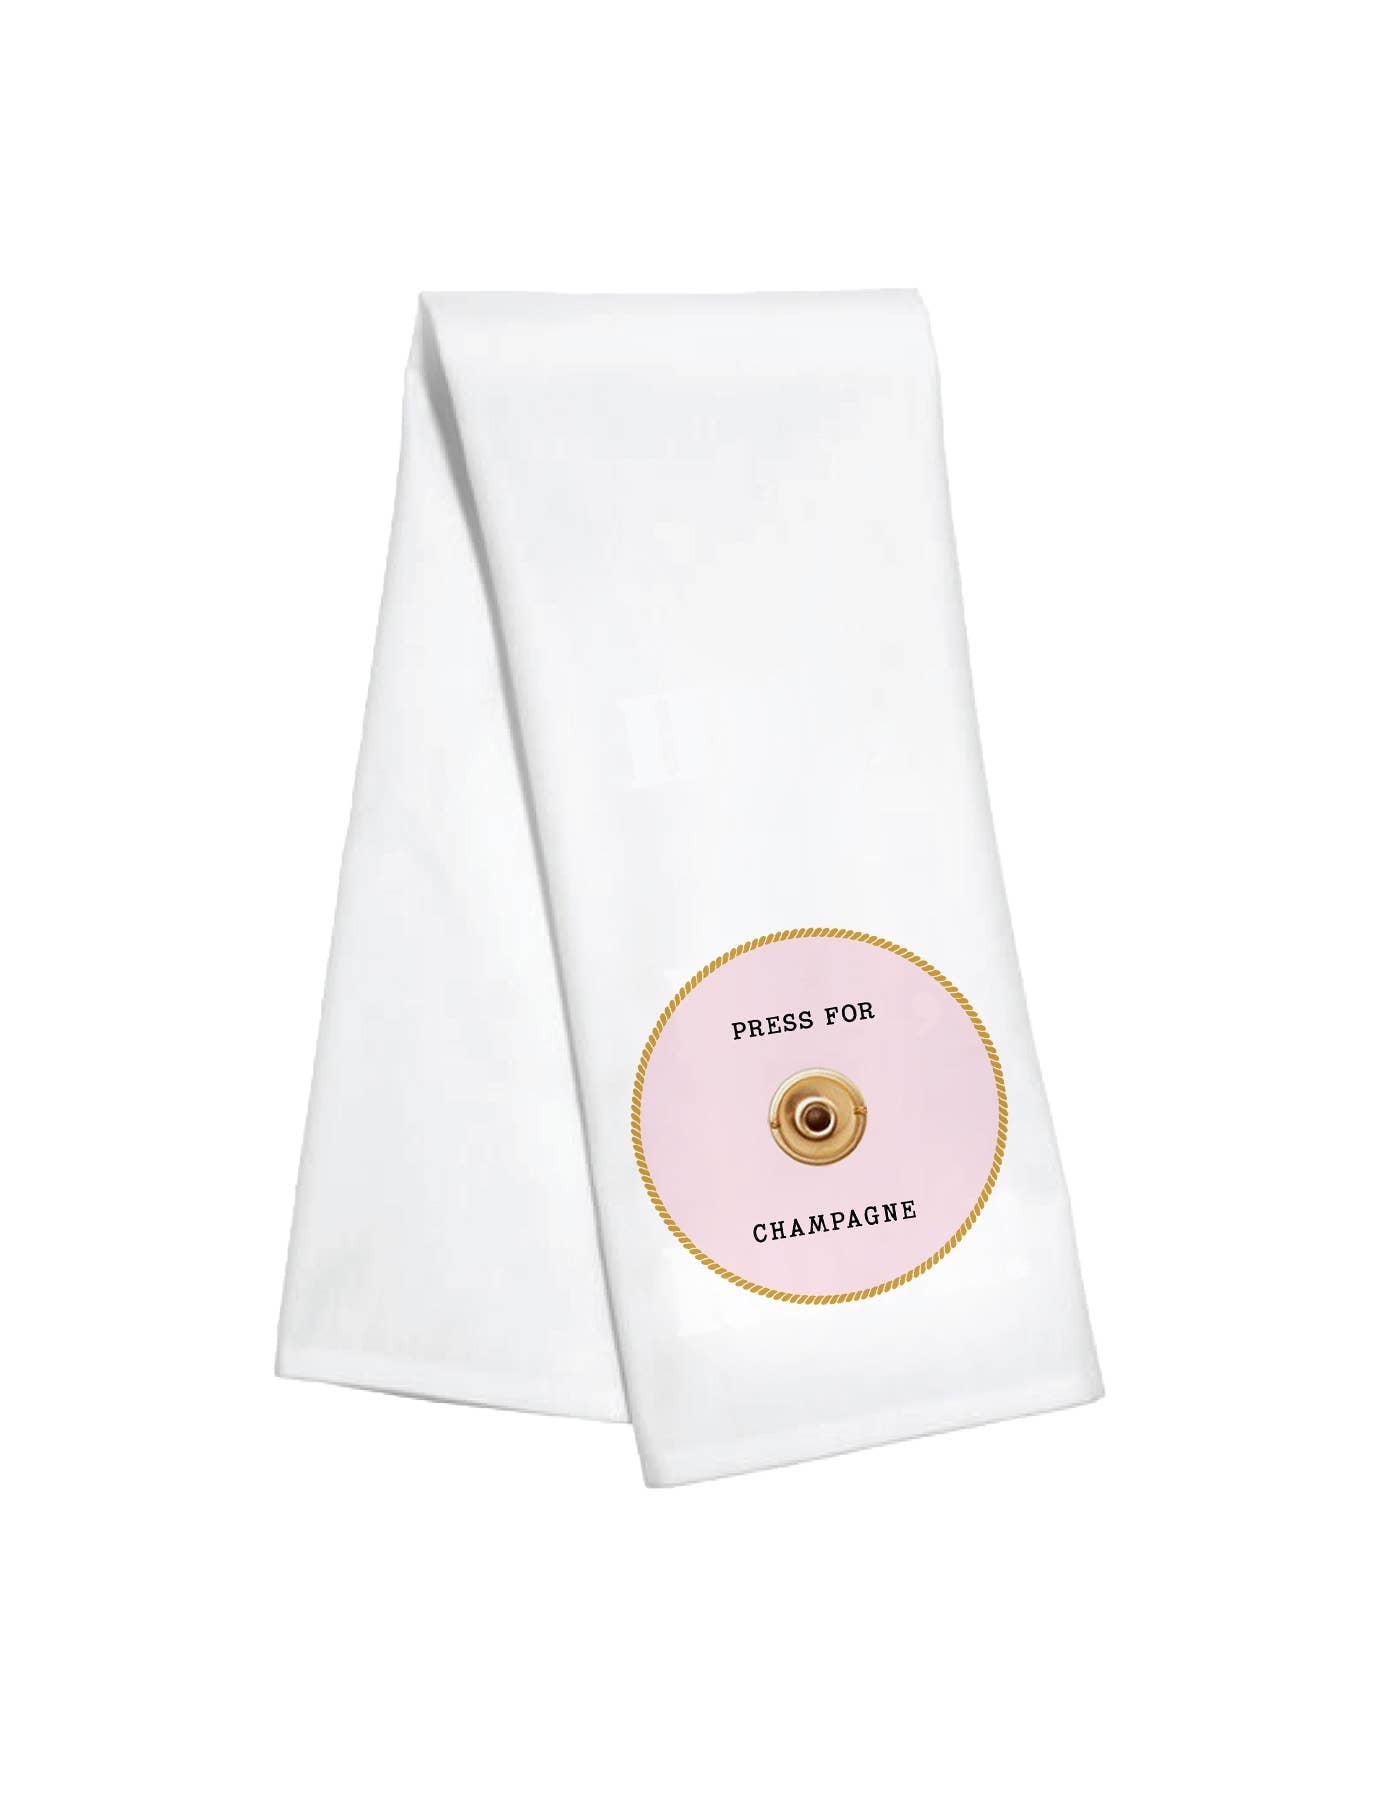 Kitchen Towel- Press for Champagne